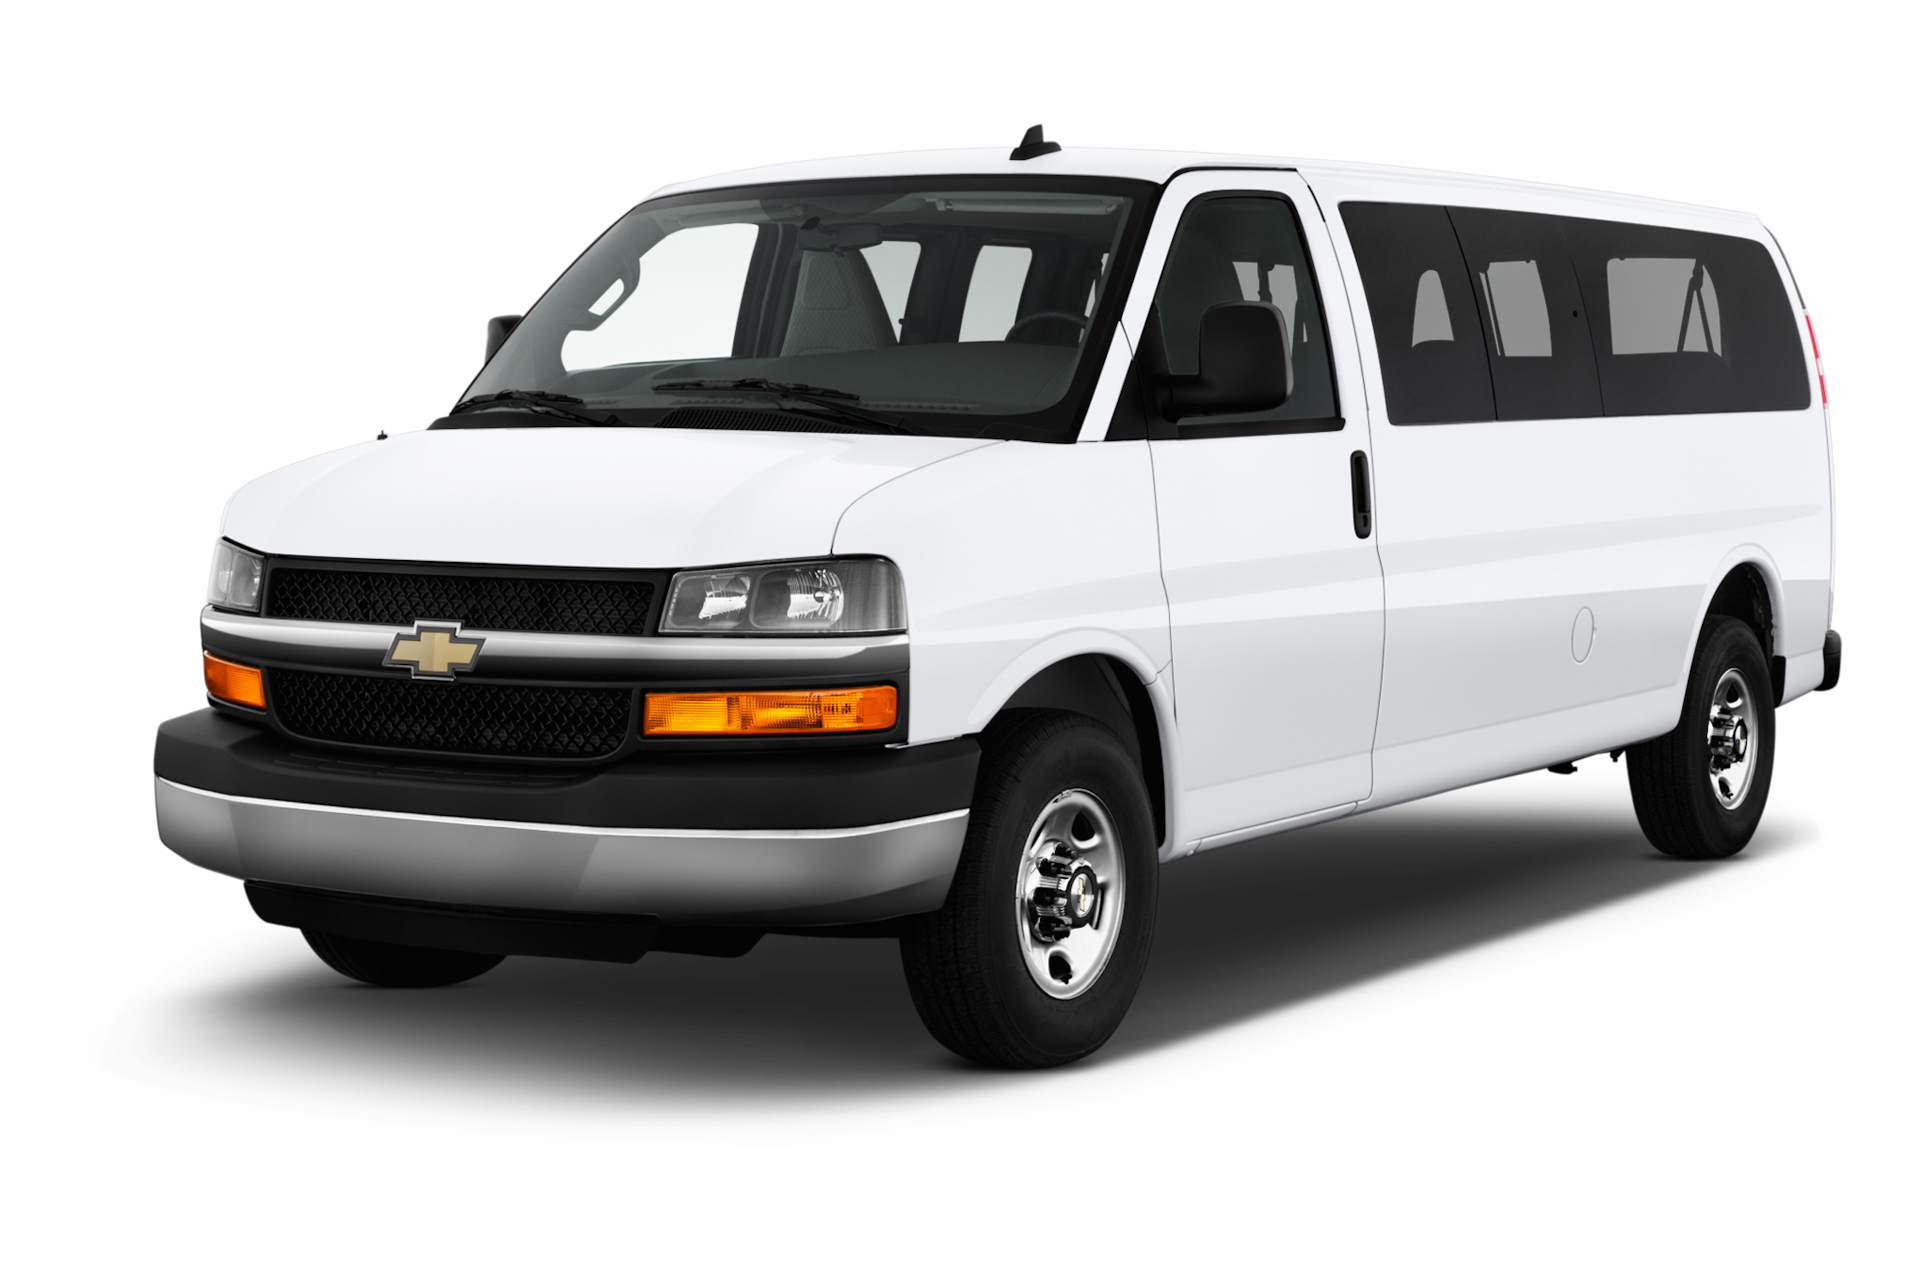 2020 Chevrolet Express Prices, Reviews, and Photos - MotorTrend